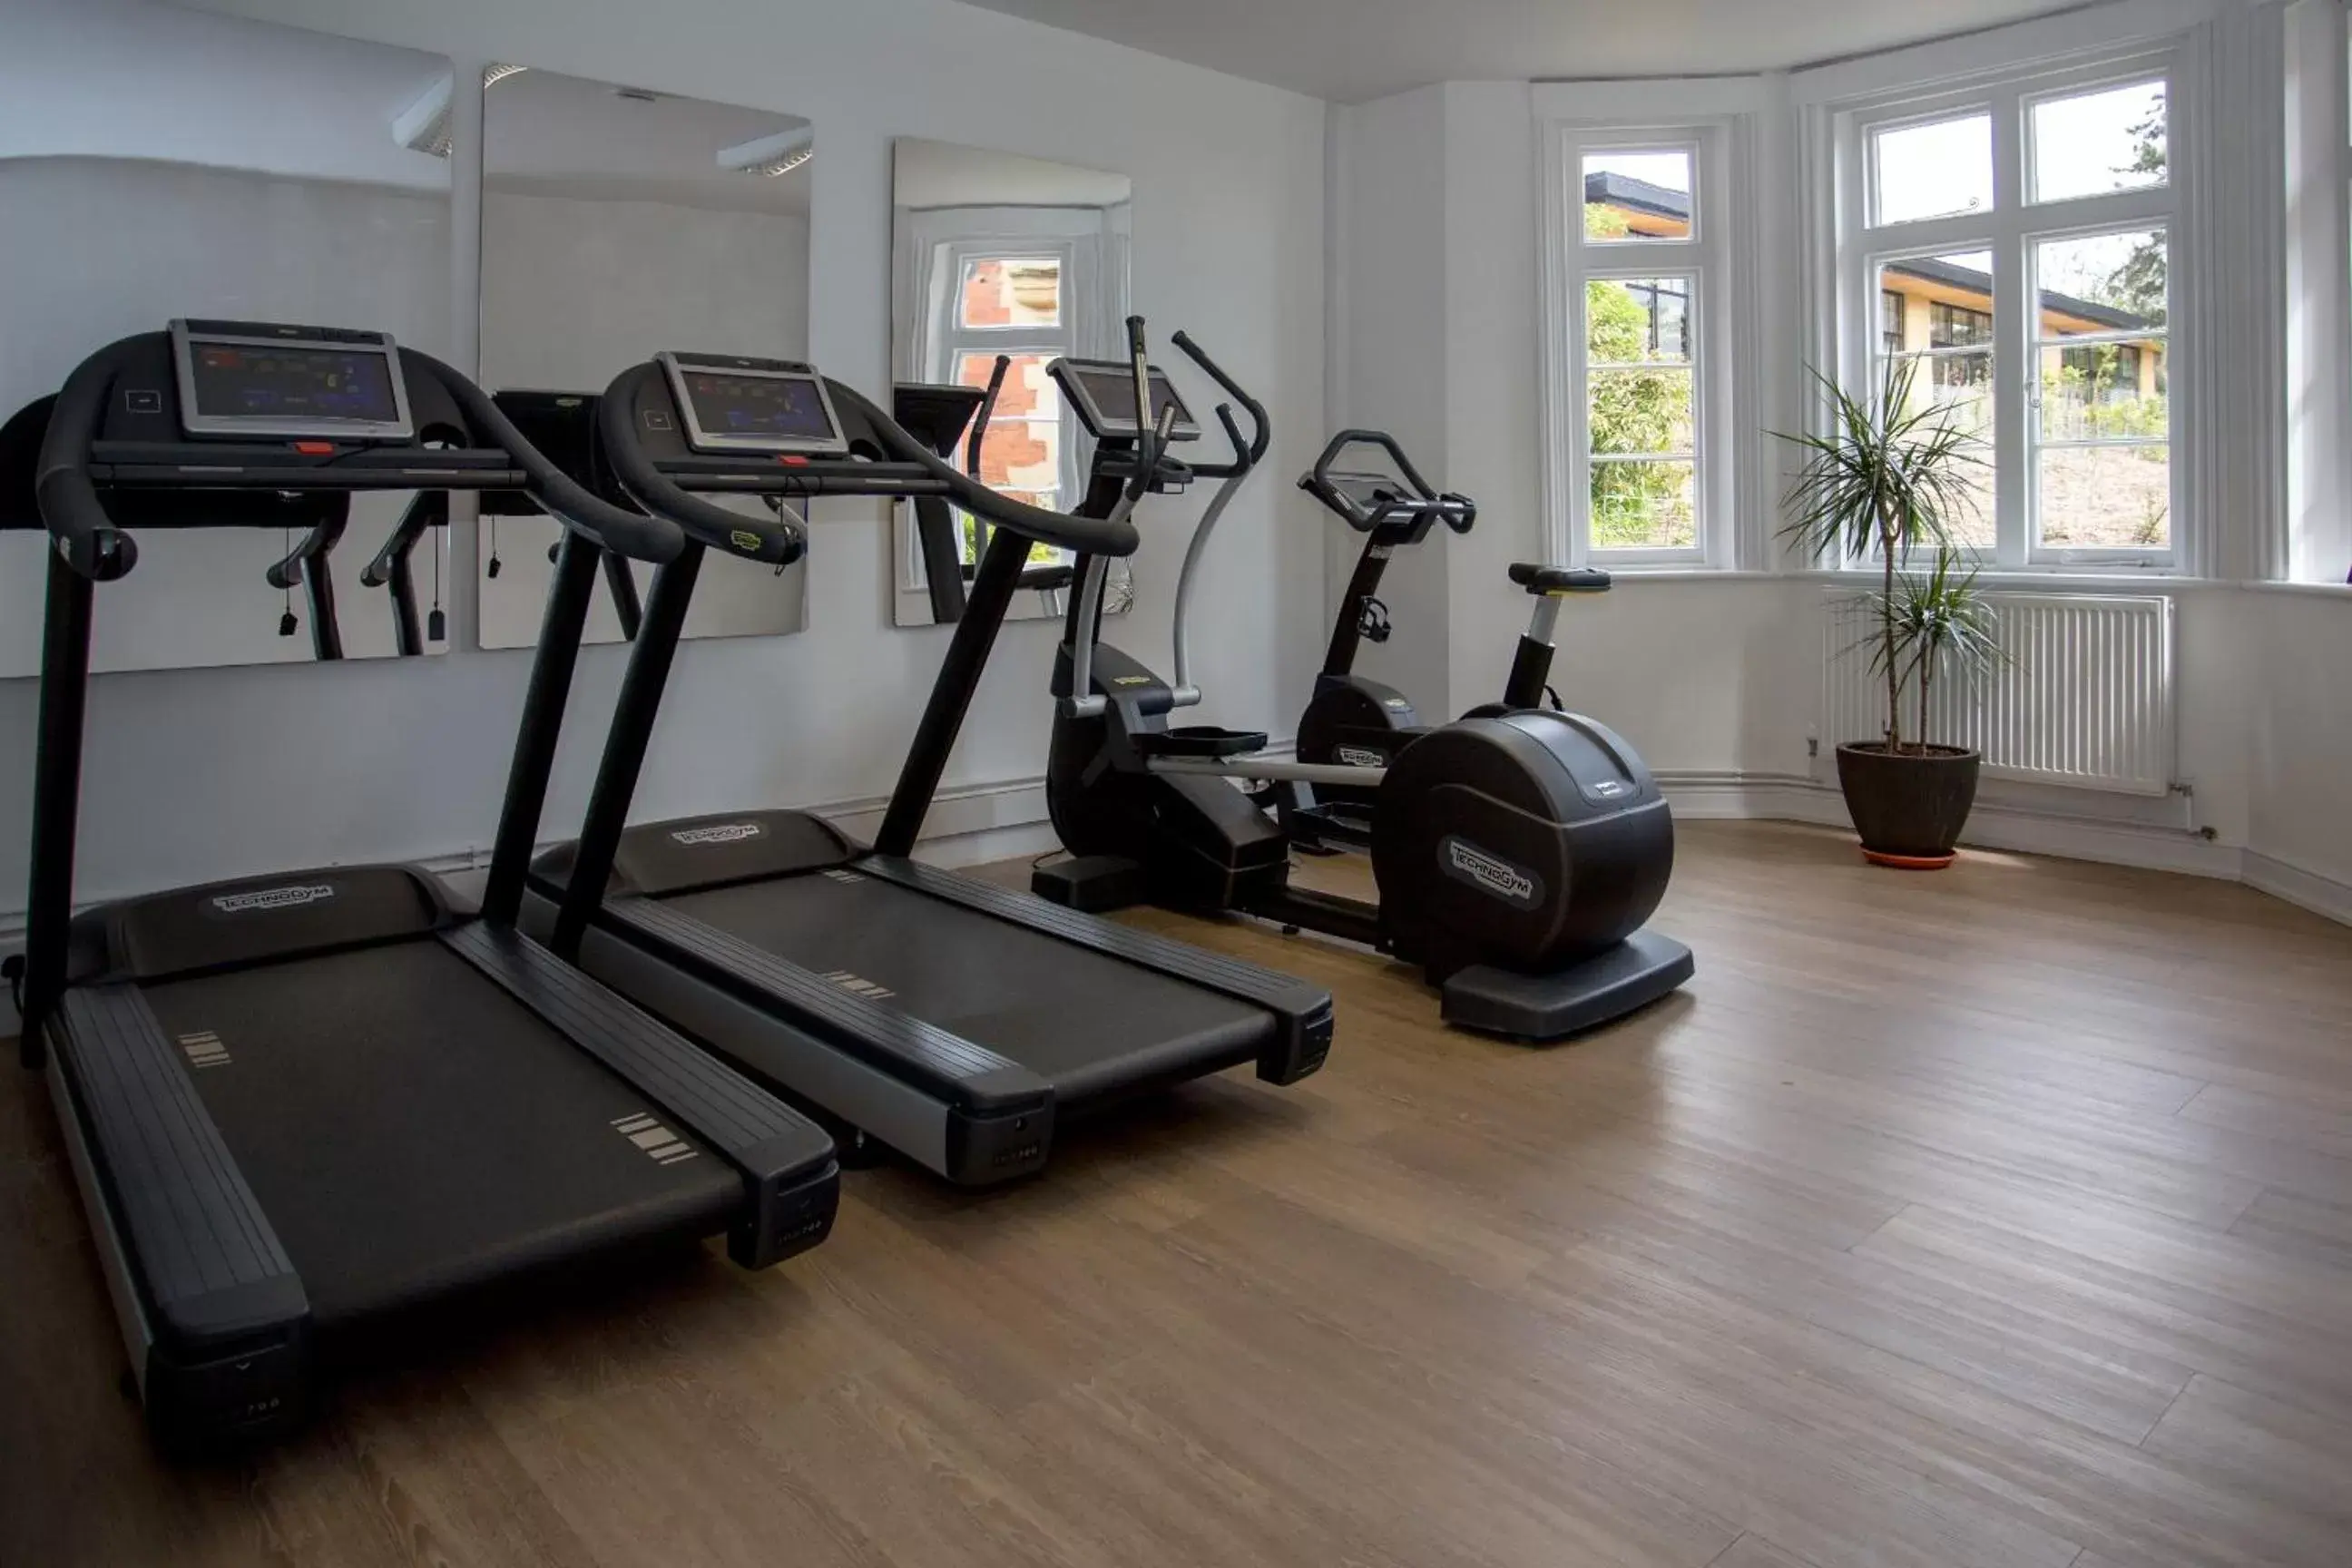 Fitness centre/facilities, Fitness Center/Facilities in The Wood Norton